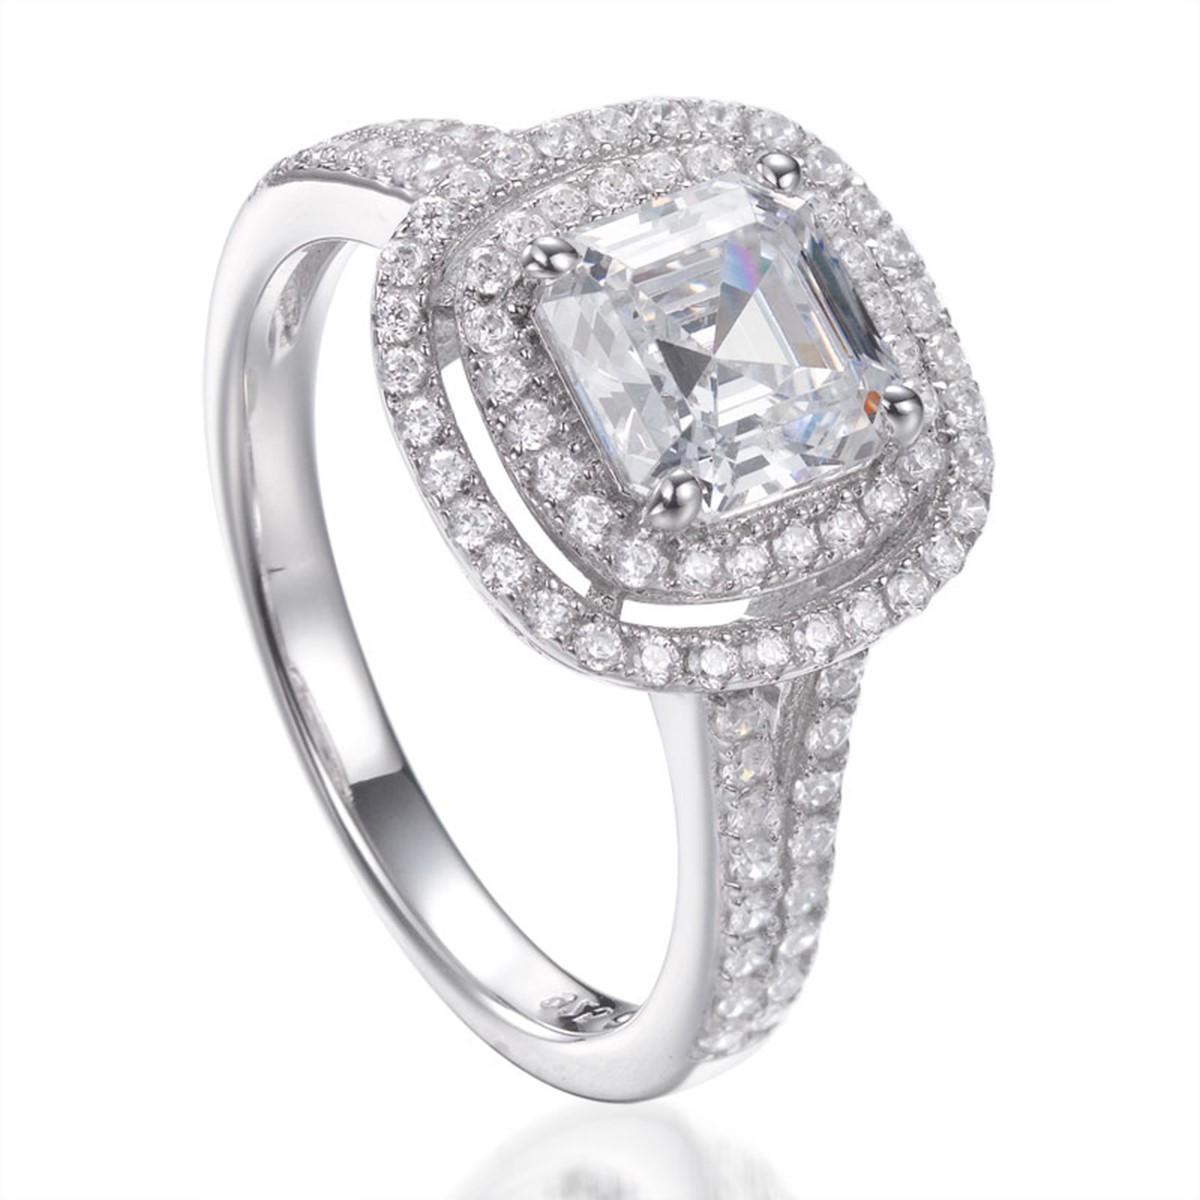 This elegant double halo ring showcases a stunning claw set centre Asscher cut cubic zirconia measuring 2.85 carat, surrounded by a double row of dazzling round brilliant cut cubic zirconia, exquisitely set into a split shank. 

Composed of 925